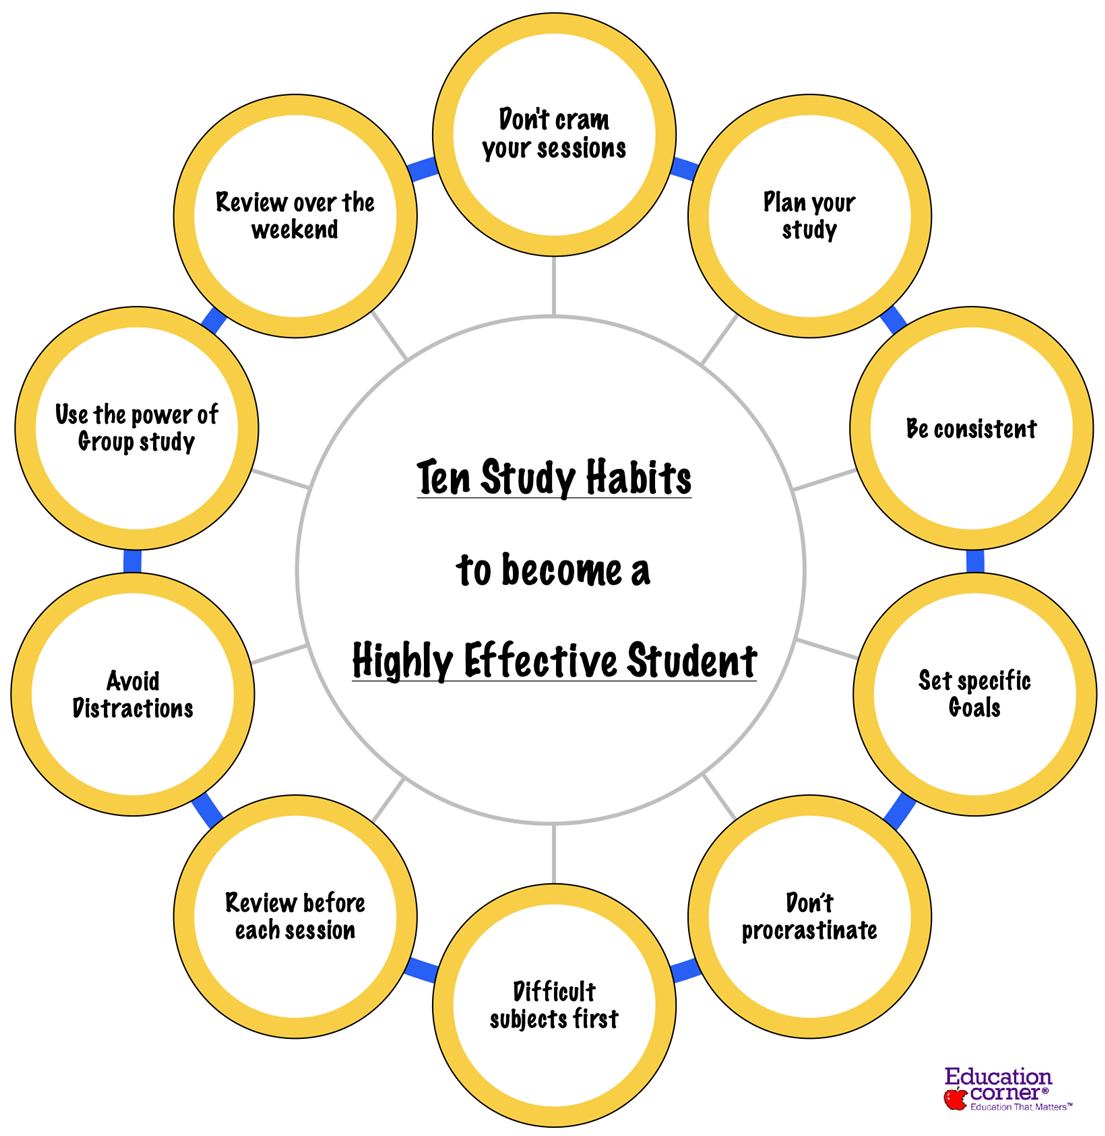 10 Study Habits of Highly Effective Students